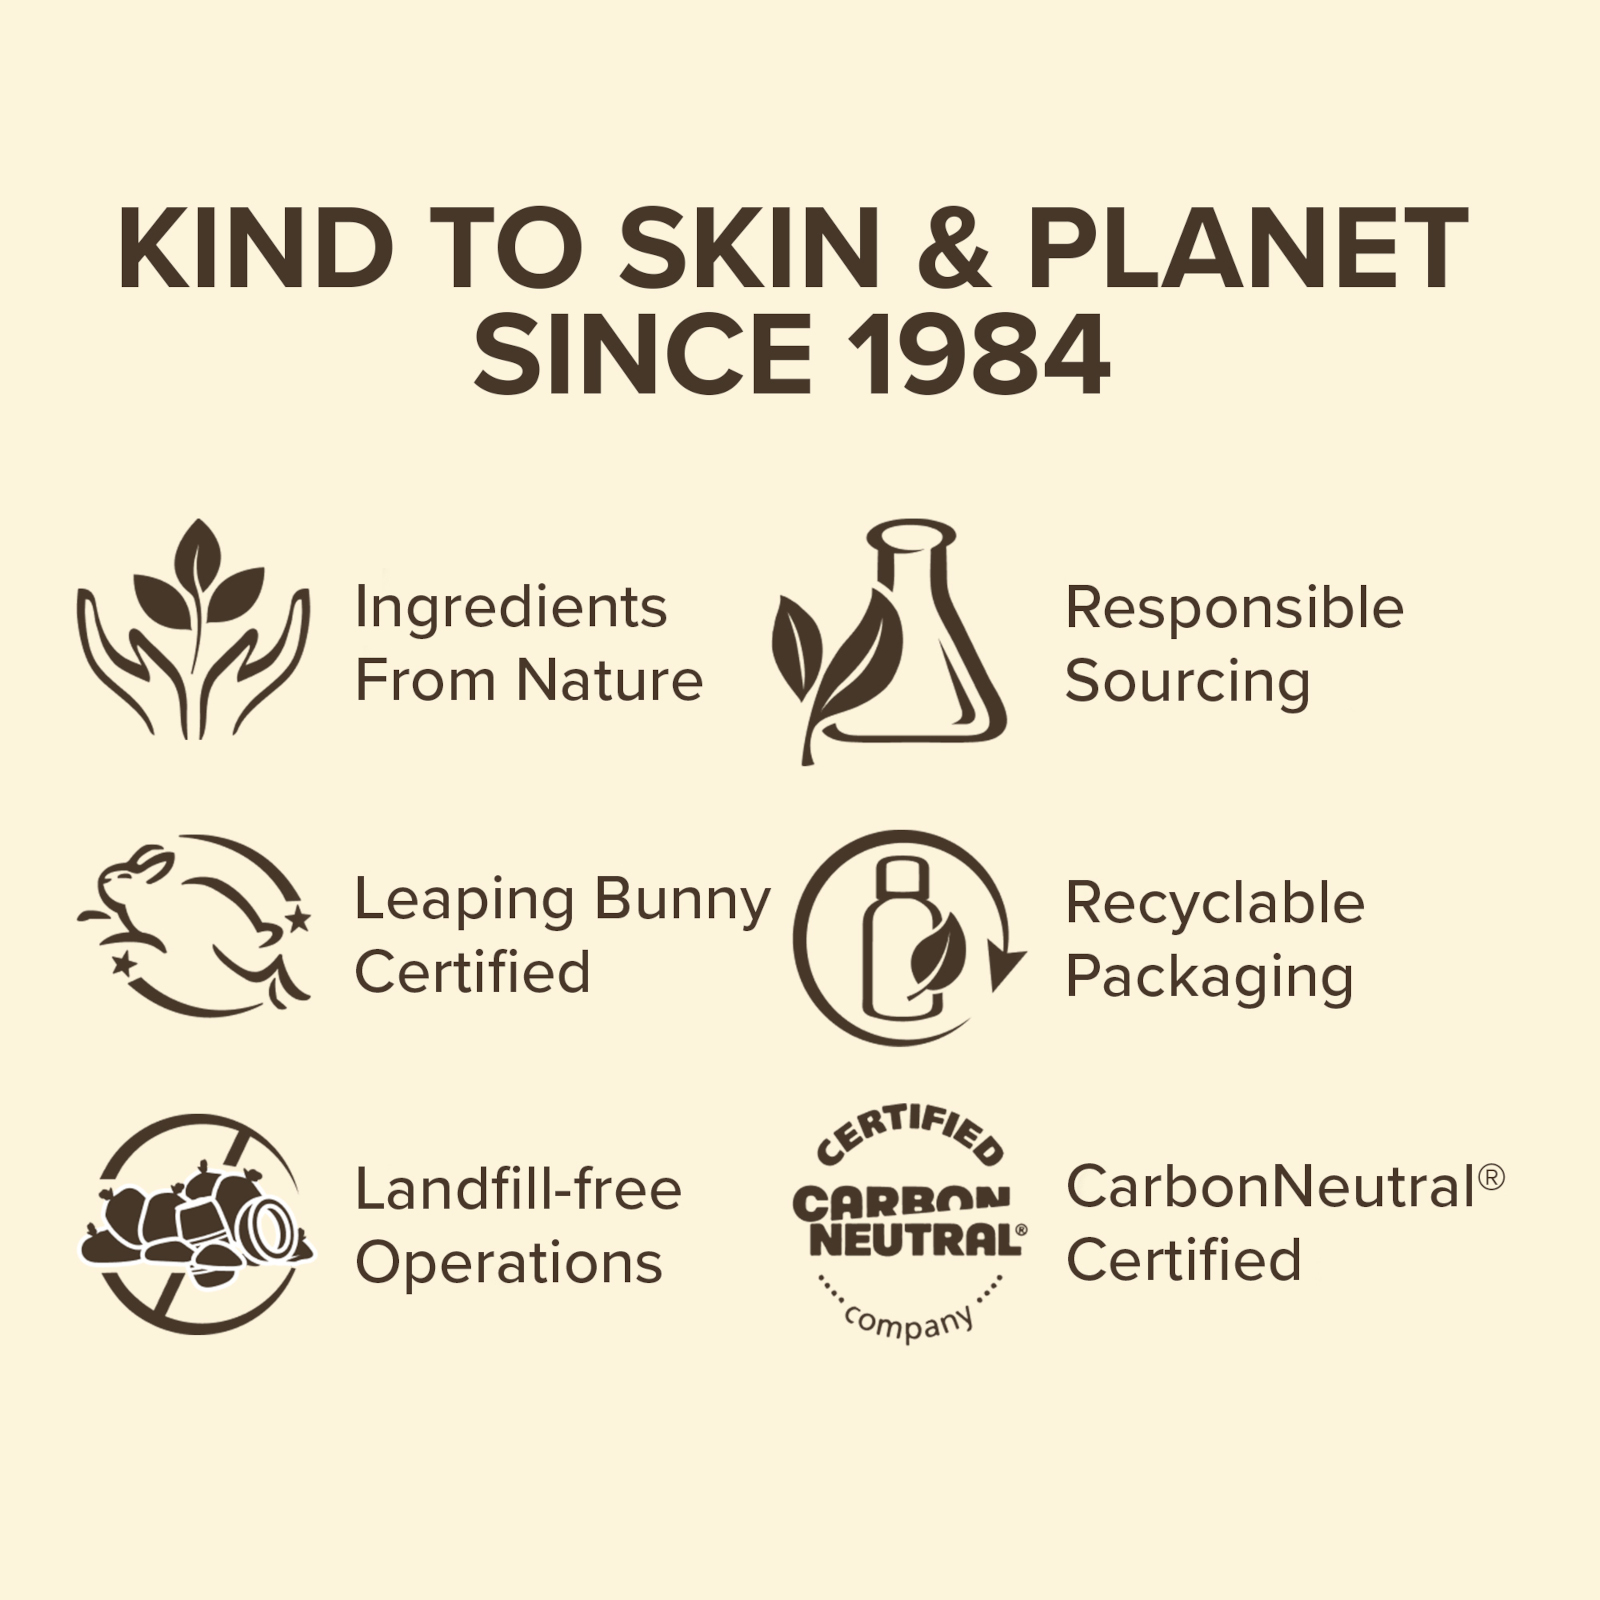 
              KIND TO SKIN & PLANET SINCE 1984 
              Ingredients From Nature 
              Leaping Bunny Certified 
              Landfill-free Operations 
              oiA 
              Responsible Sourcing 
              Recyclable Packaging 
              c.,401p,00 CAPRI CarbonNeutral® NEUTRAL® Certified c°,71 p a<\'i
              